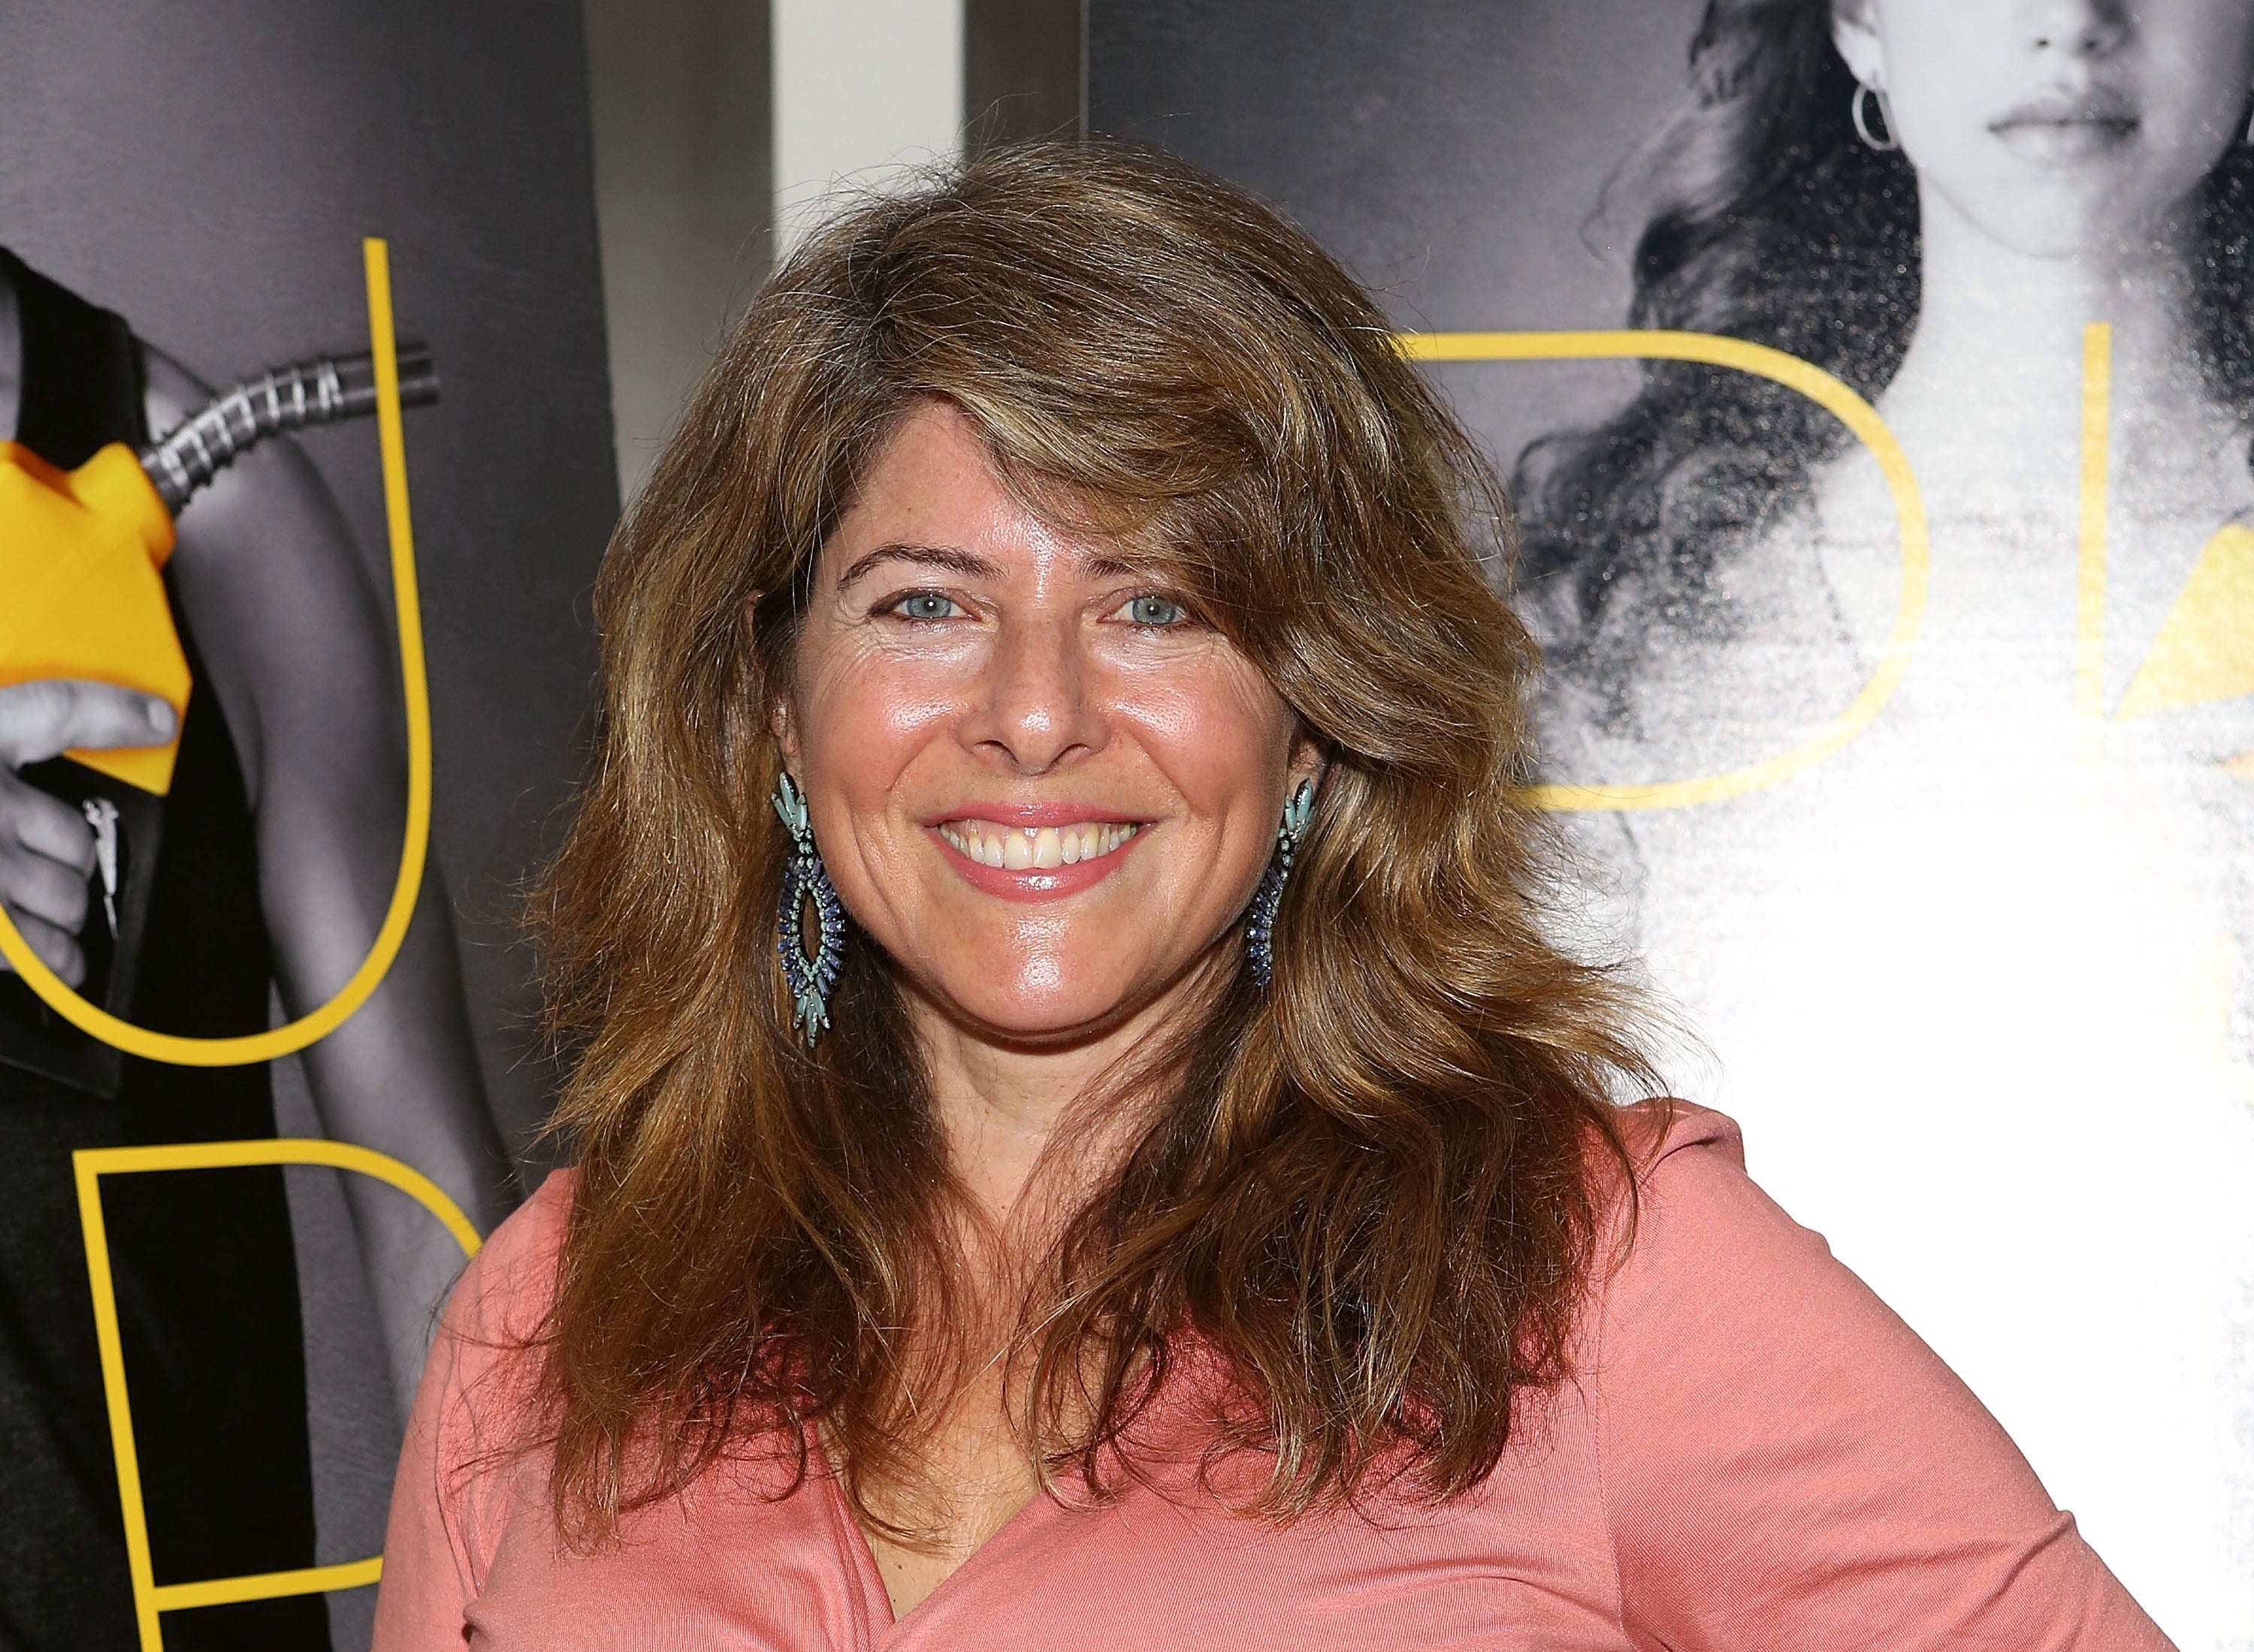 #notwelcome: Naomi Wolf has joined Donald Trump in Twitter exile